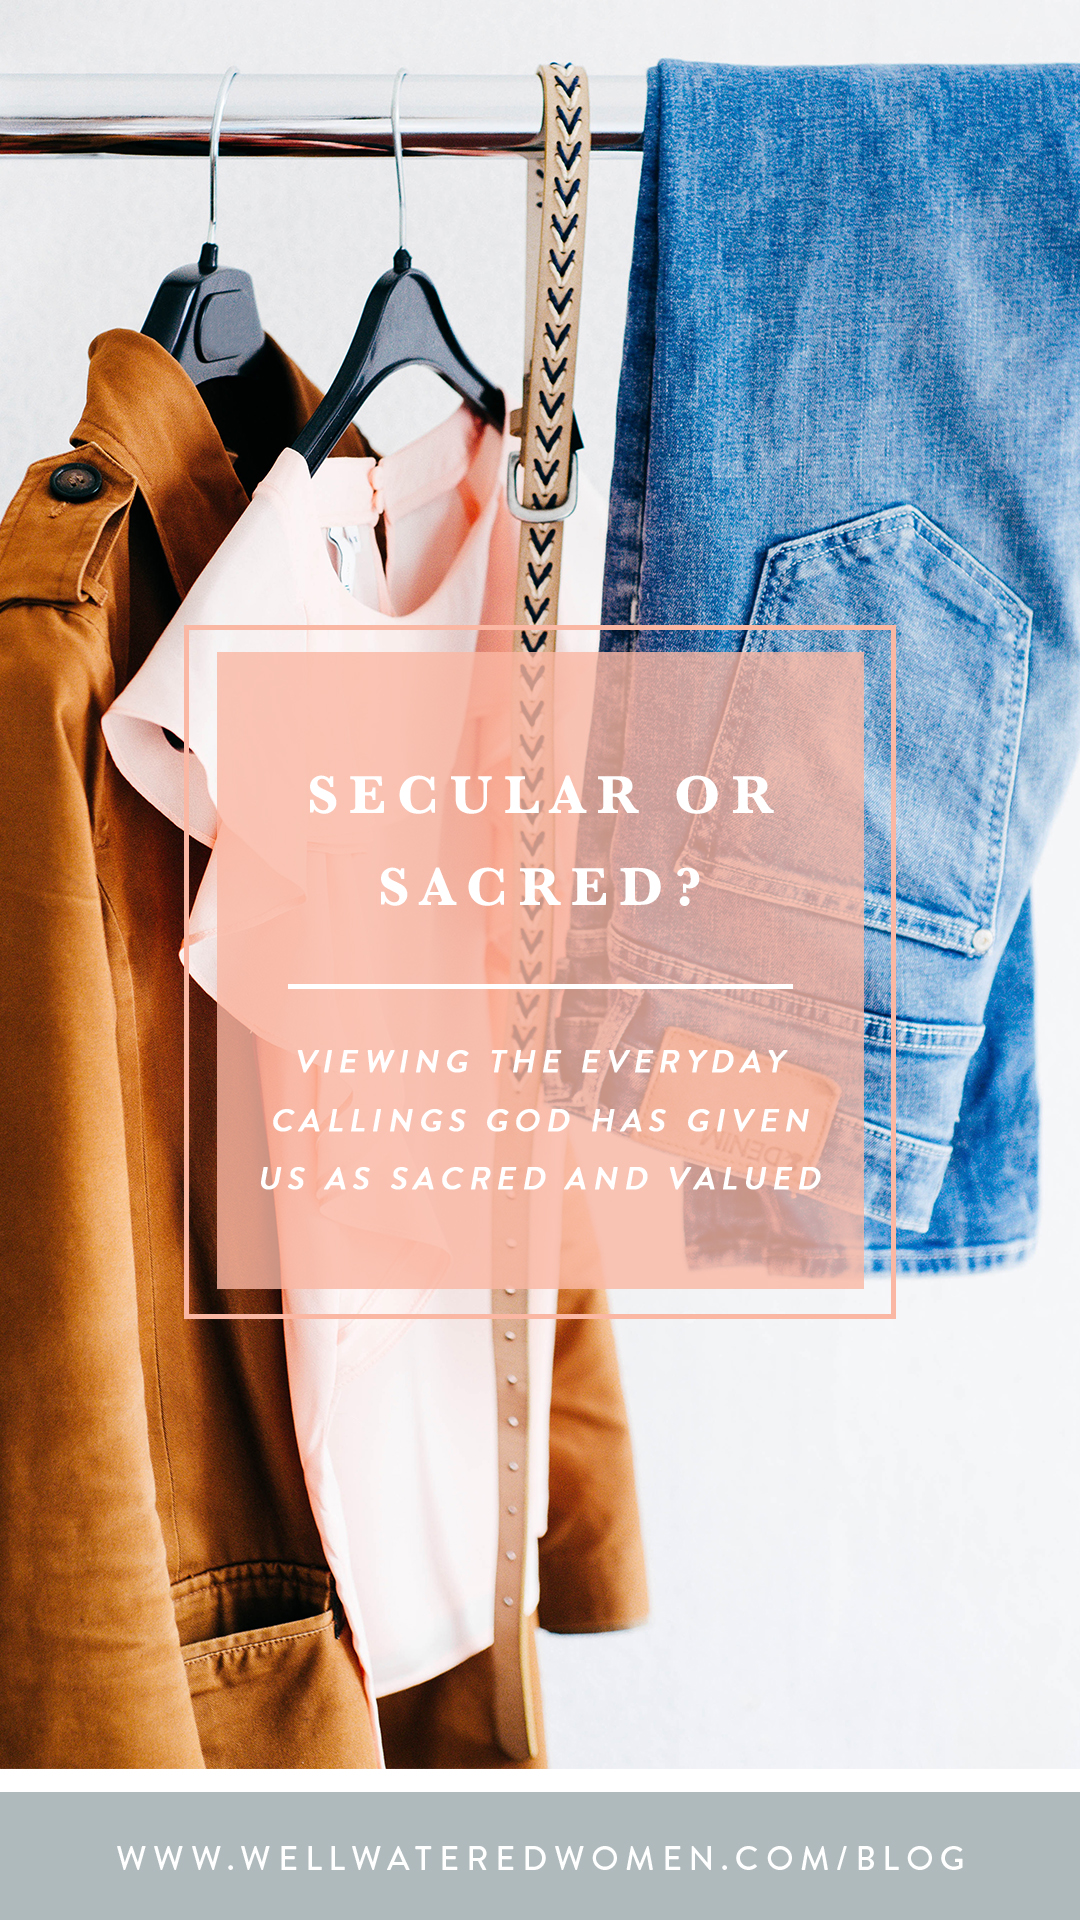 Secular or Sacred? Viewing the everyday callings God has given us as sacred and valuable!